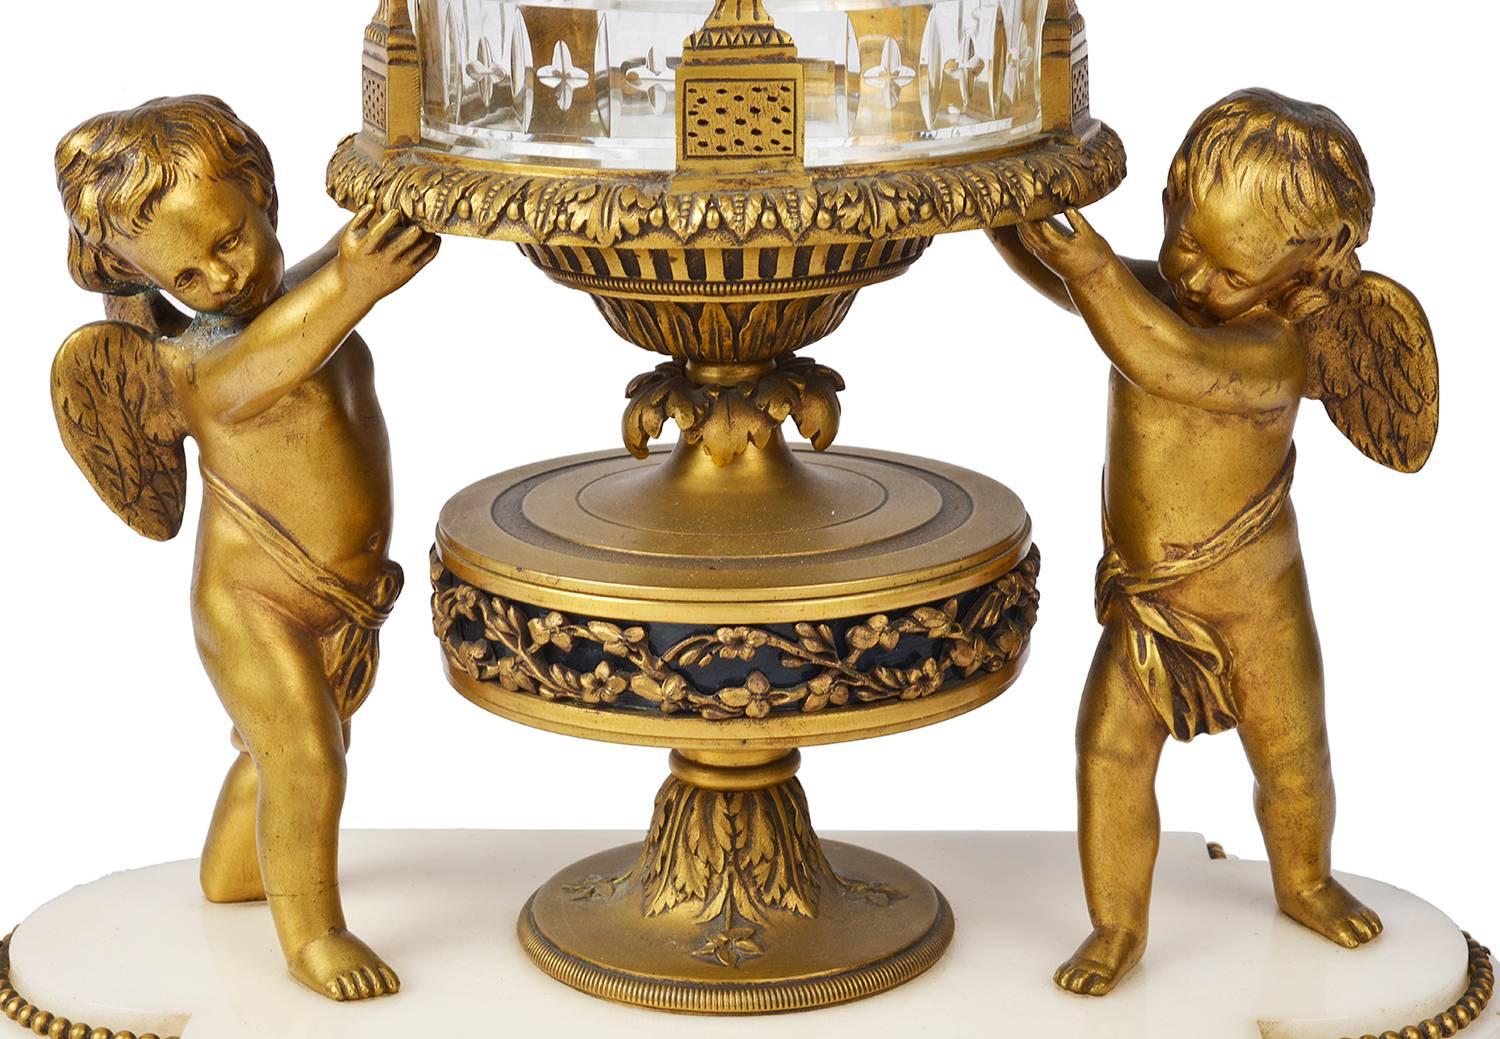 A very good quality late 19th century Louis XVI style ormolu and cut-glass revolving mantel clock. Having cherubs on either side support the glass case with classical gilded ormolu swags and foliate decoration. Revolving enamel numerals to the clock